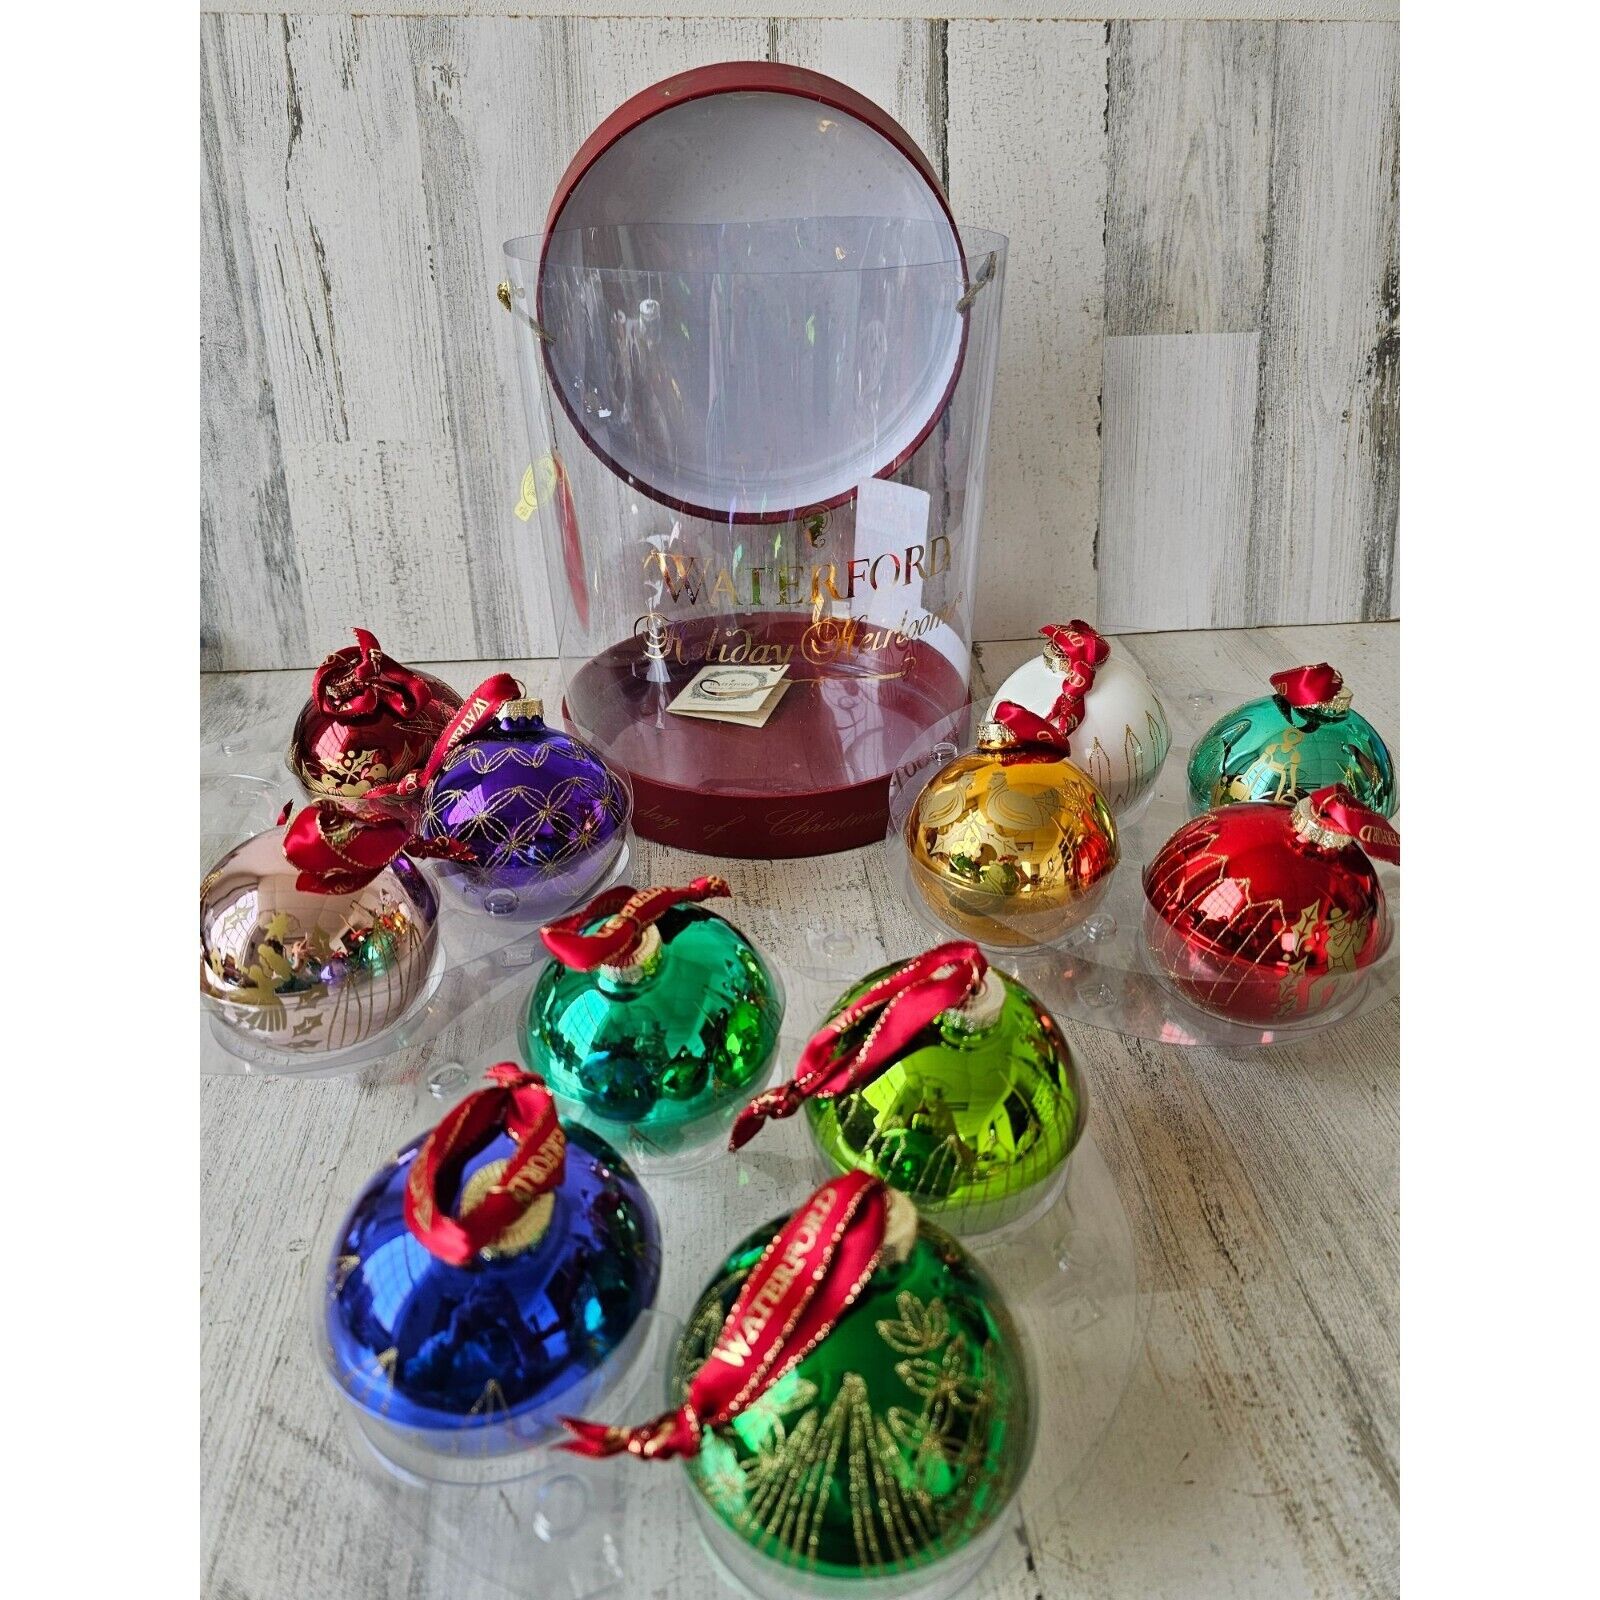 Waterford 12 Days Xmas holiday heirlooms ornament set as is Xmas tree